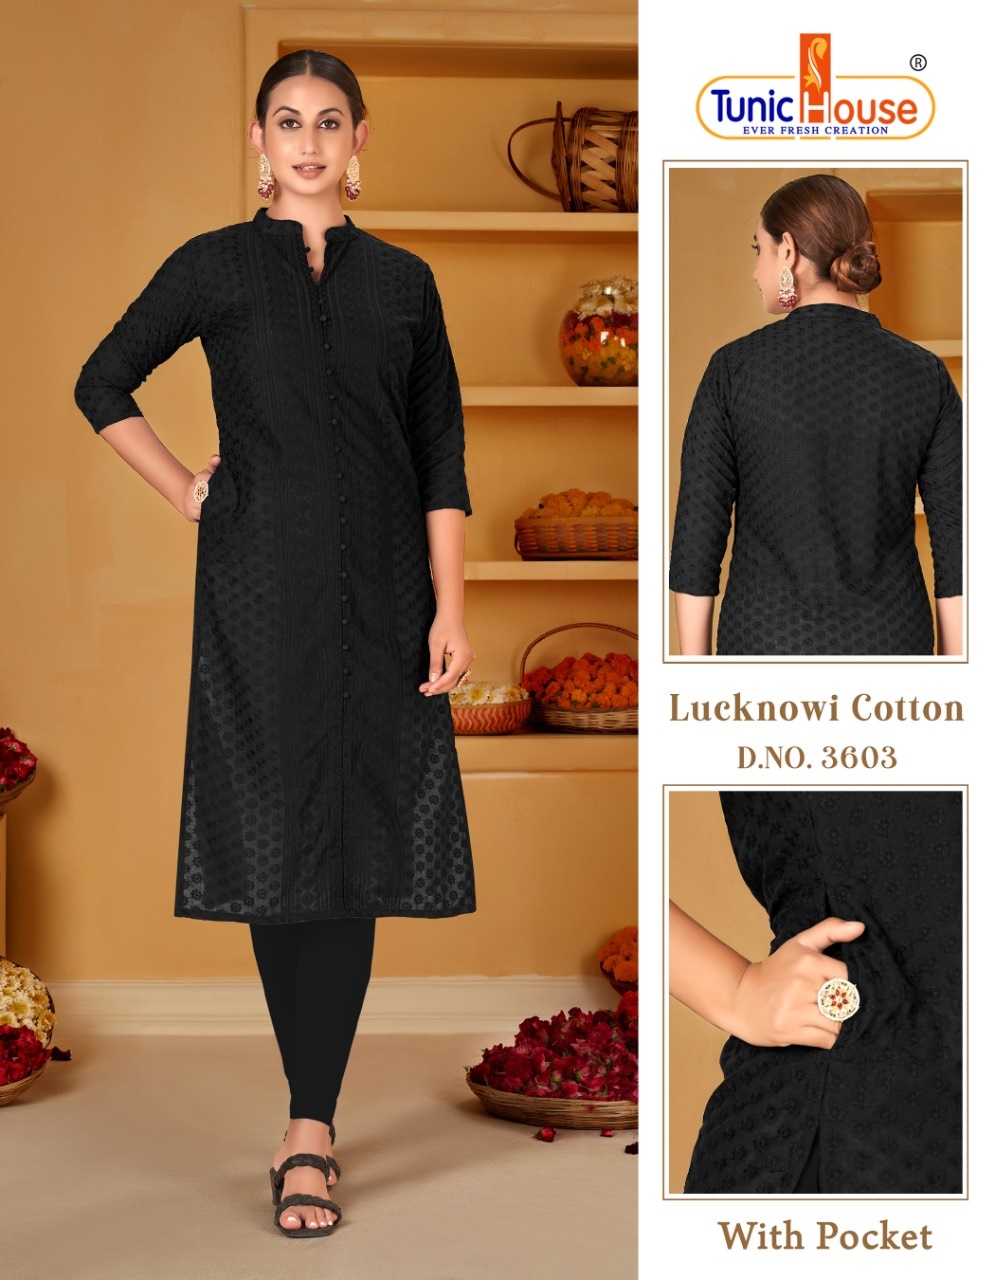 Tunic Houes Lucknowi Cotton collection 1